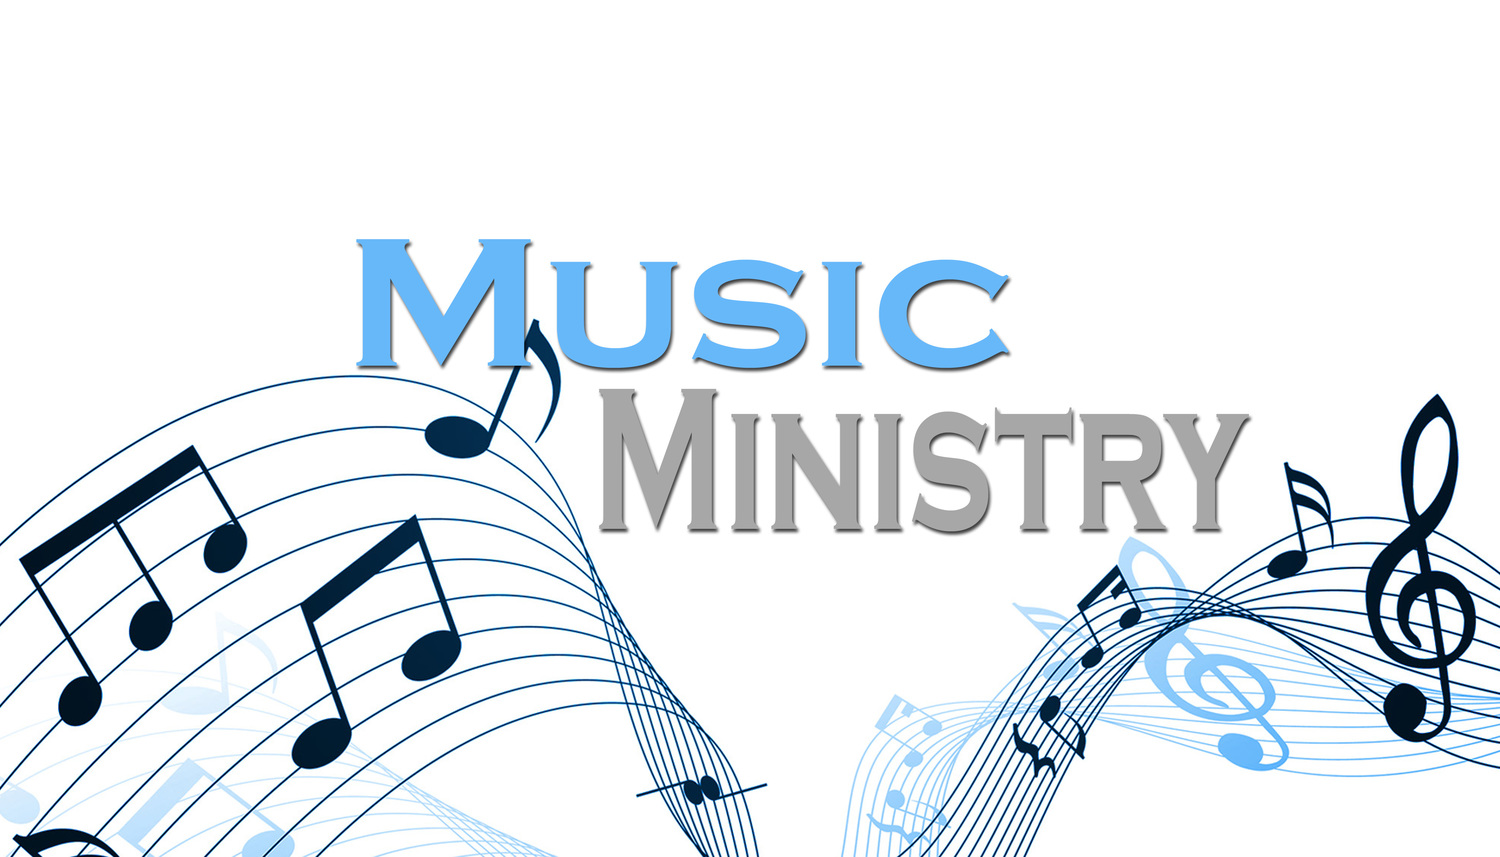 Music ministry .